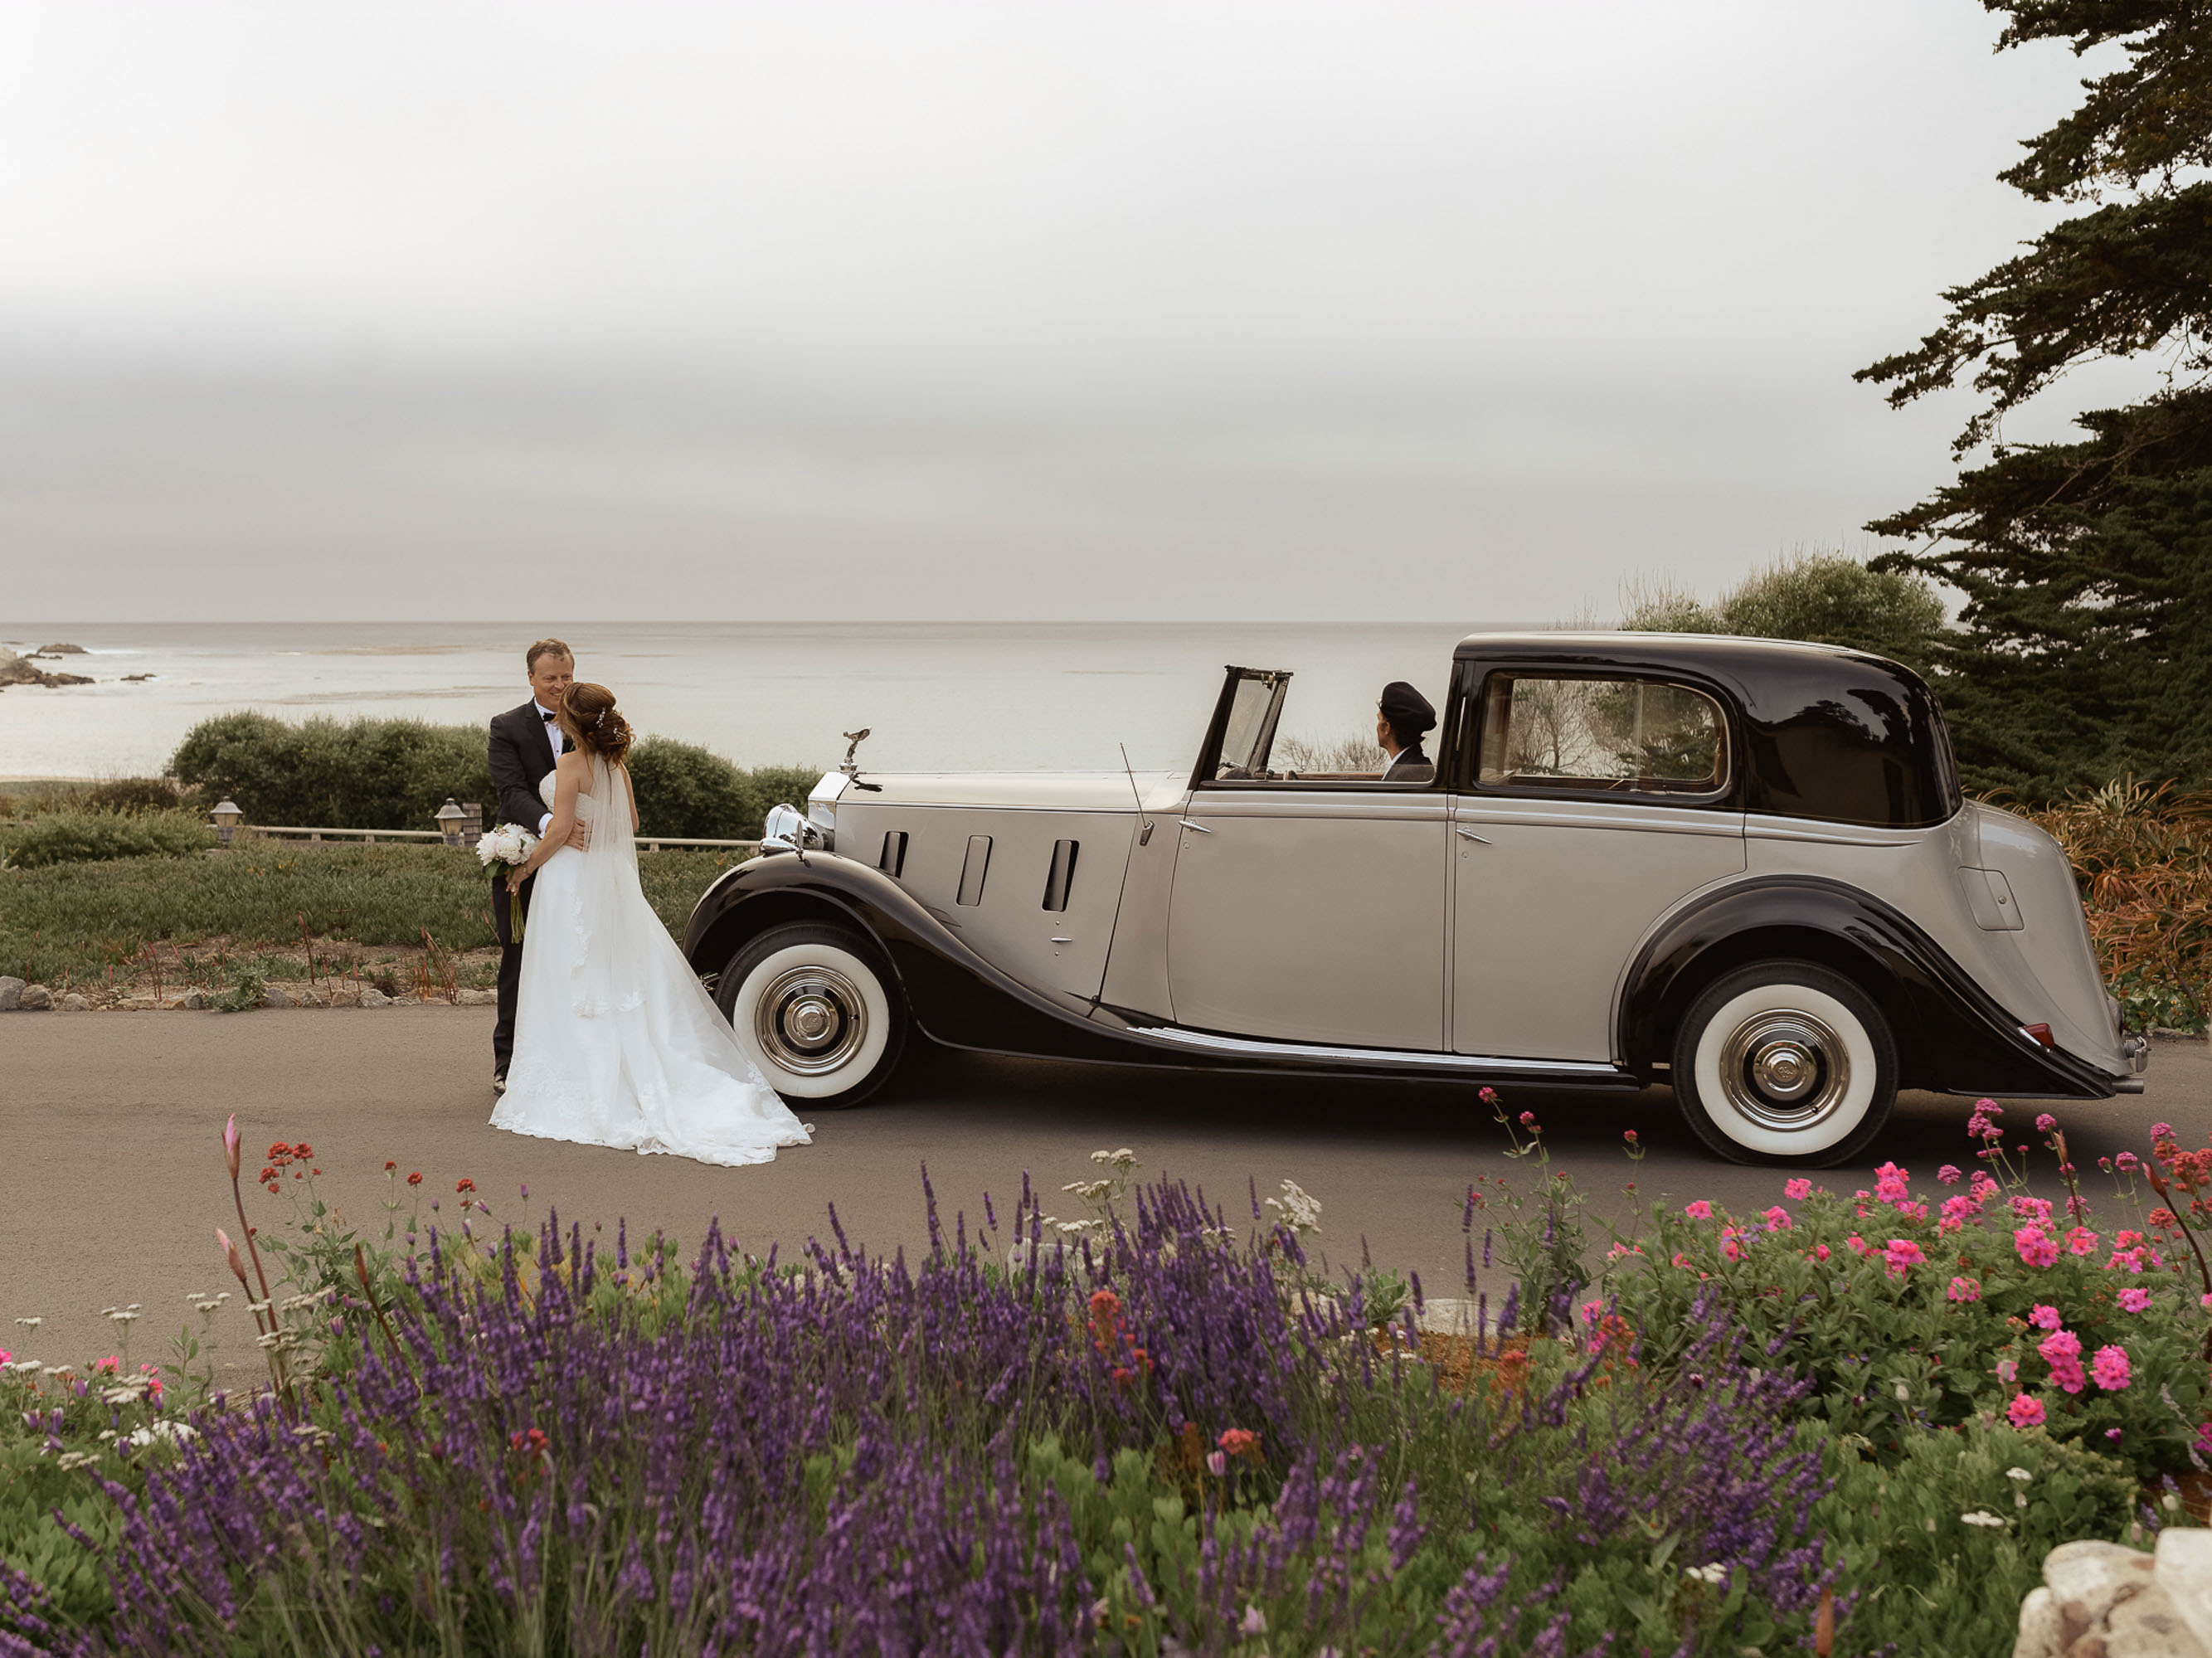 A bride and groom standing in front of a vintage car.